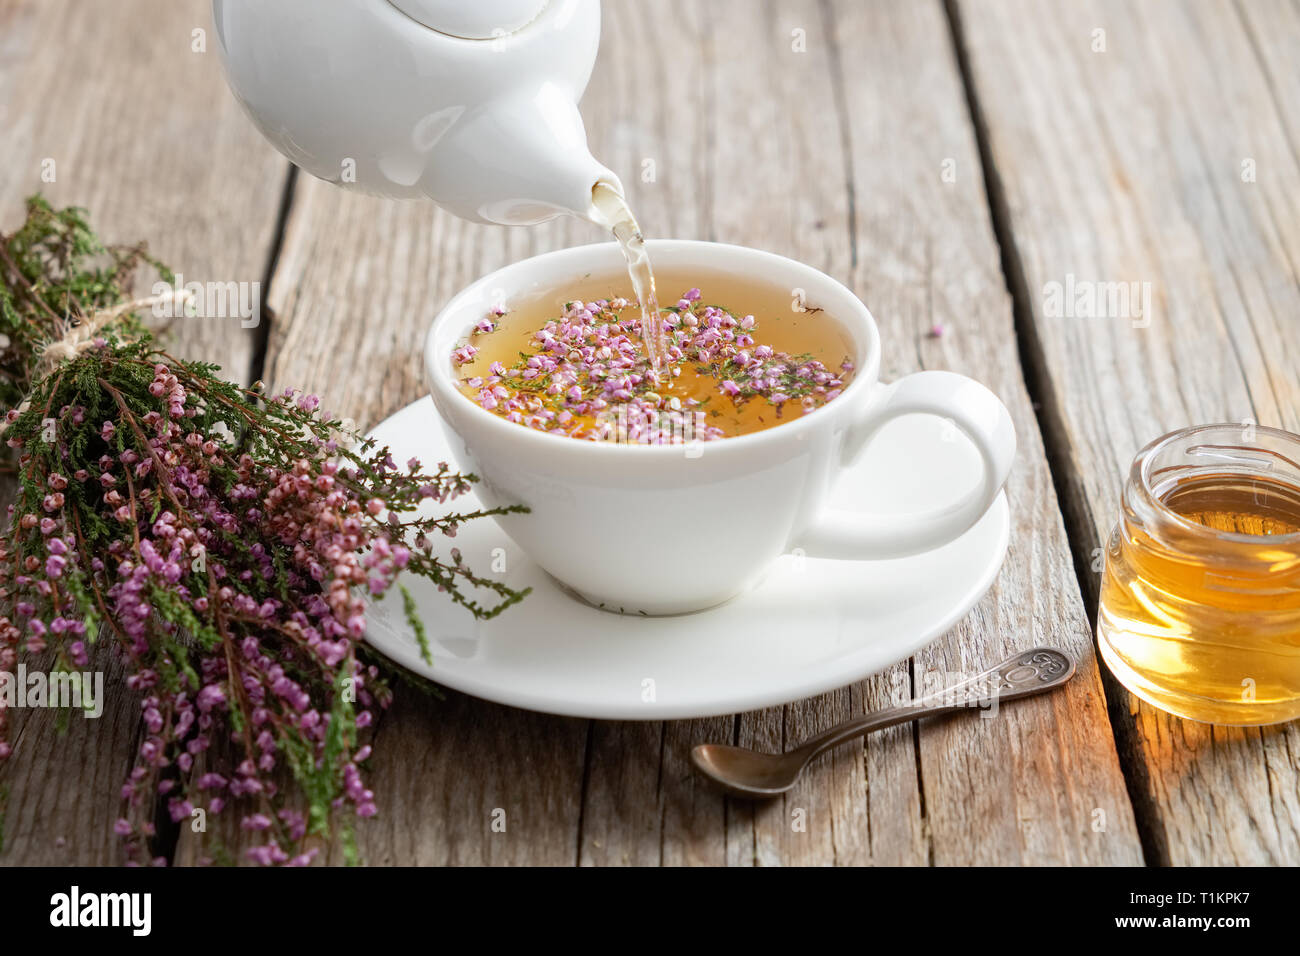 Healthy heather tea poured into white cup. Teapot, small honey jar and heather bunch. Stock Photo